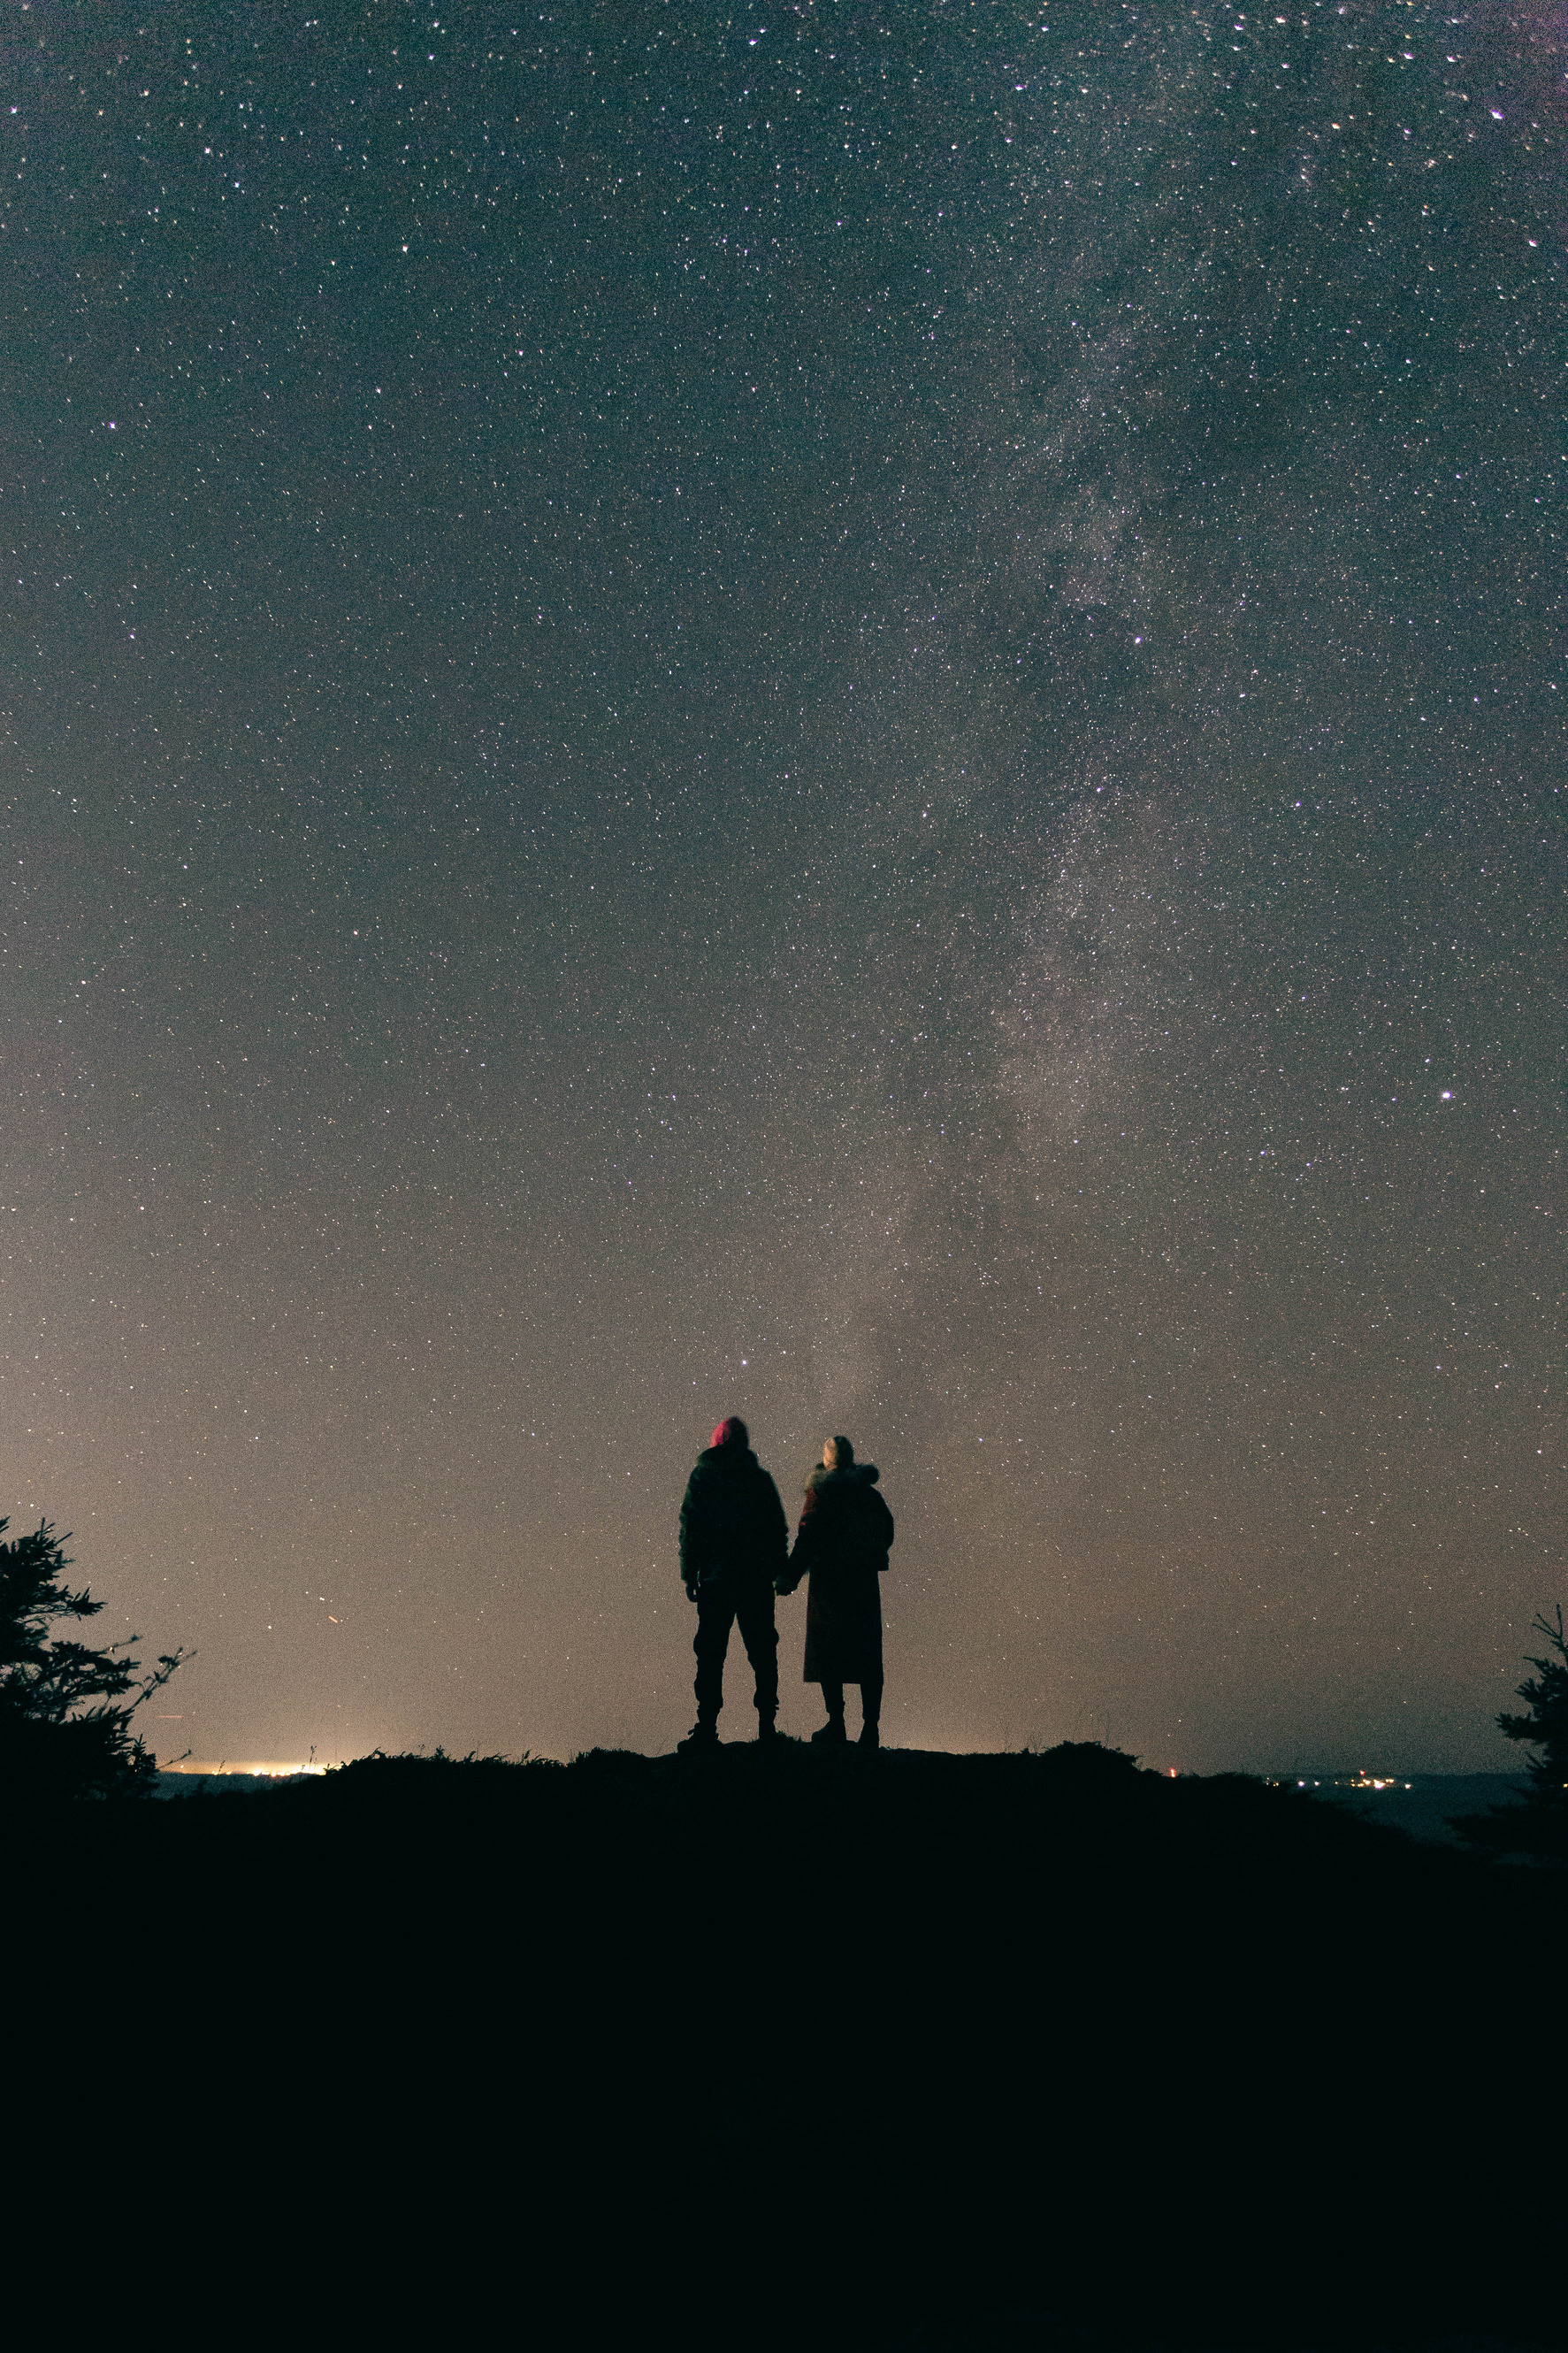 Silhouette of Couple Under Stars at Night